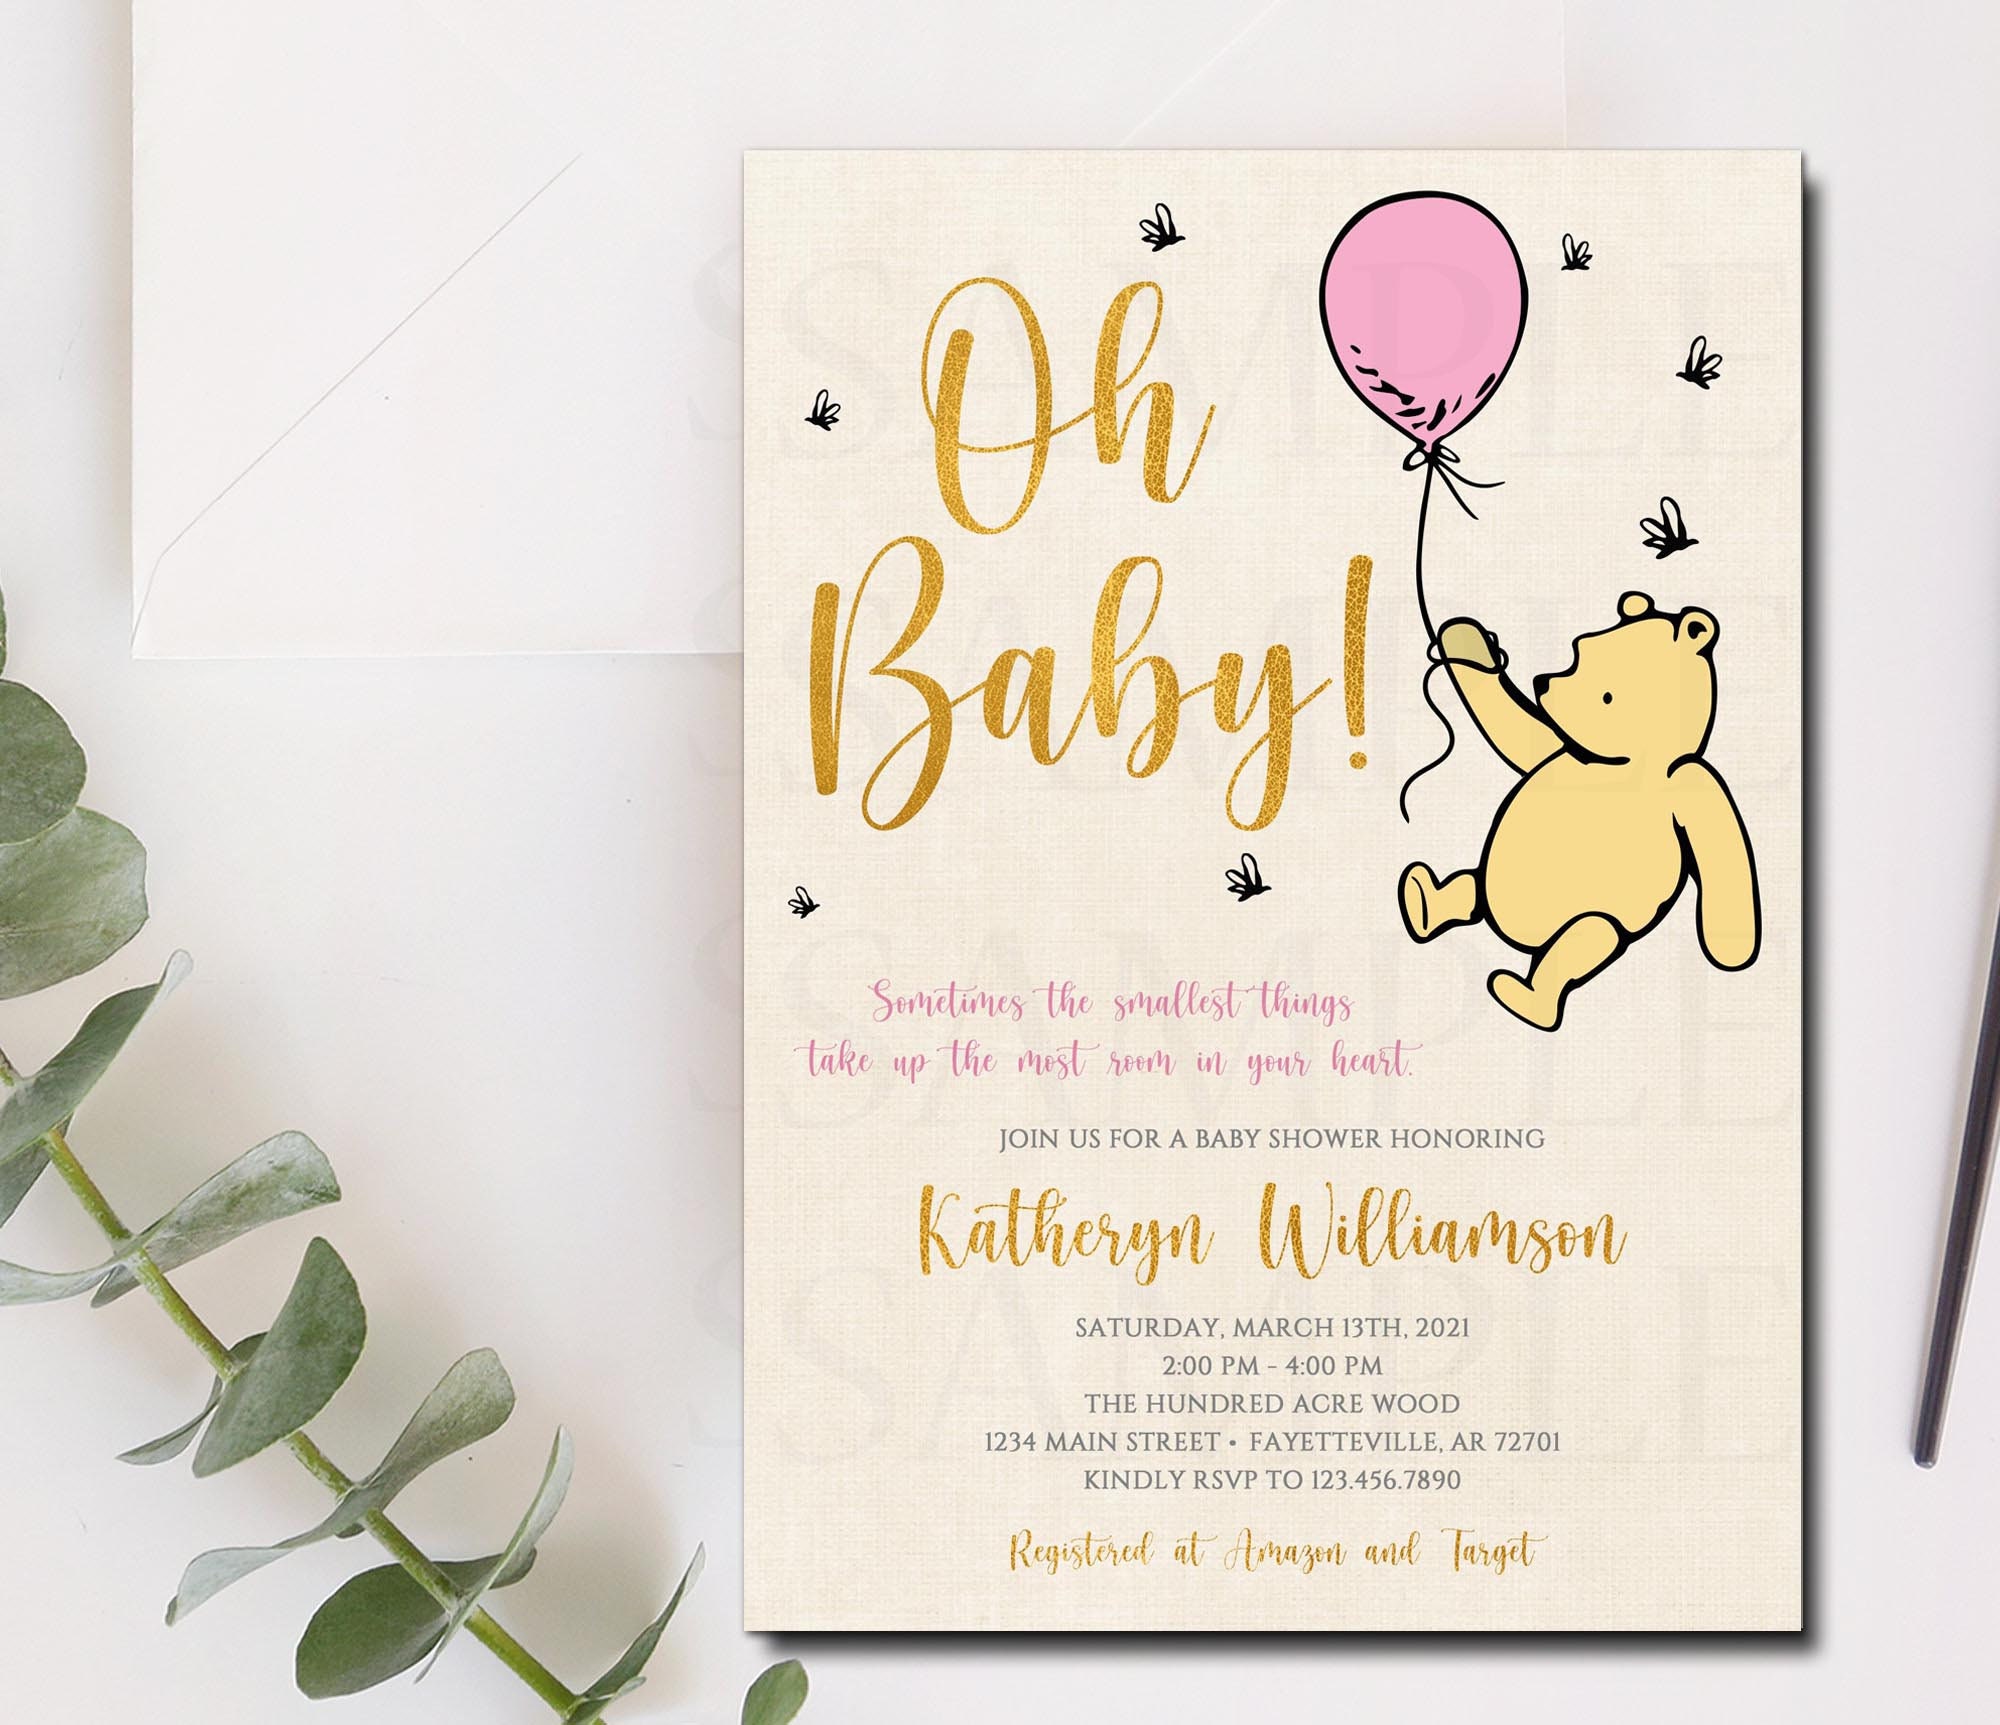 winnie-the-pooh-baby-shower-invitations-templates-free-winnie-the-pooh